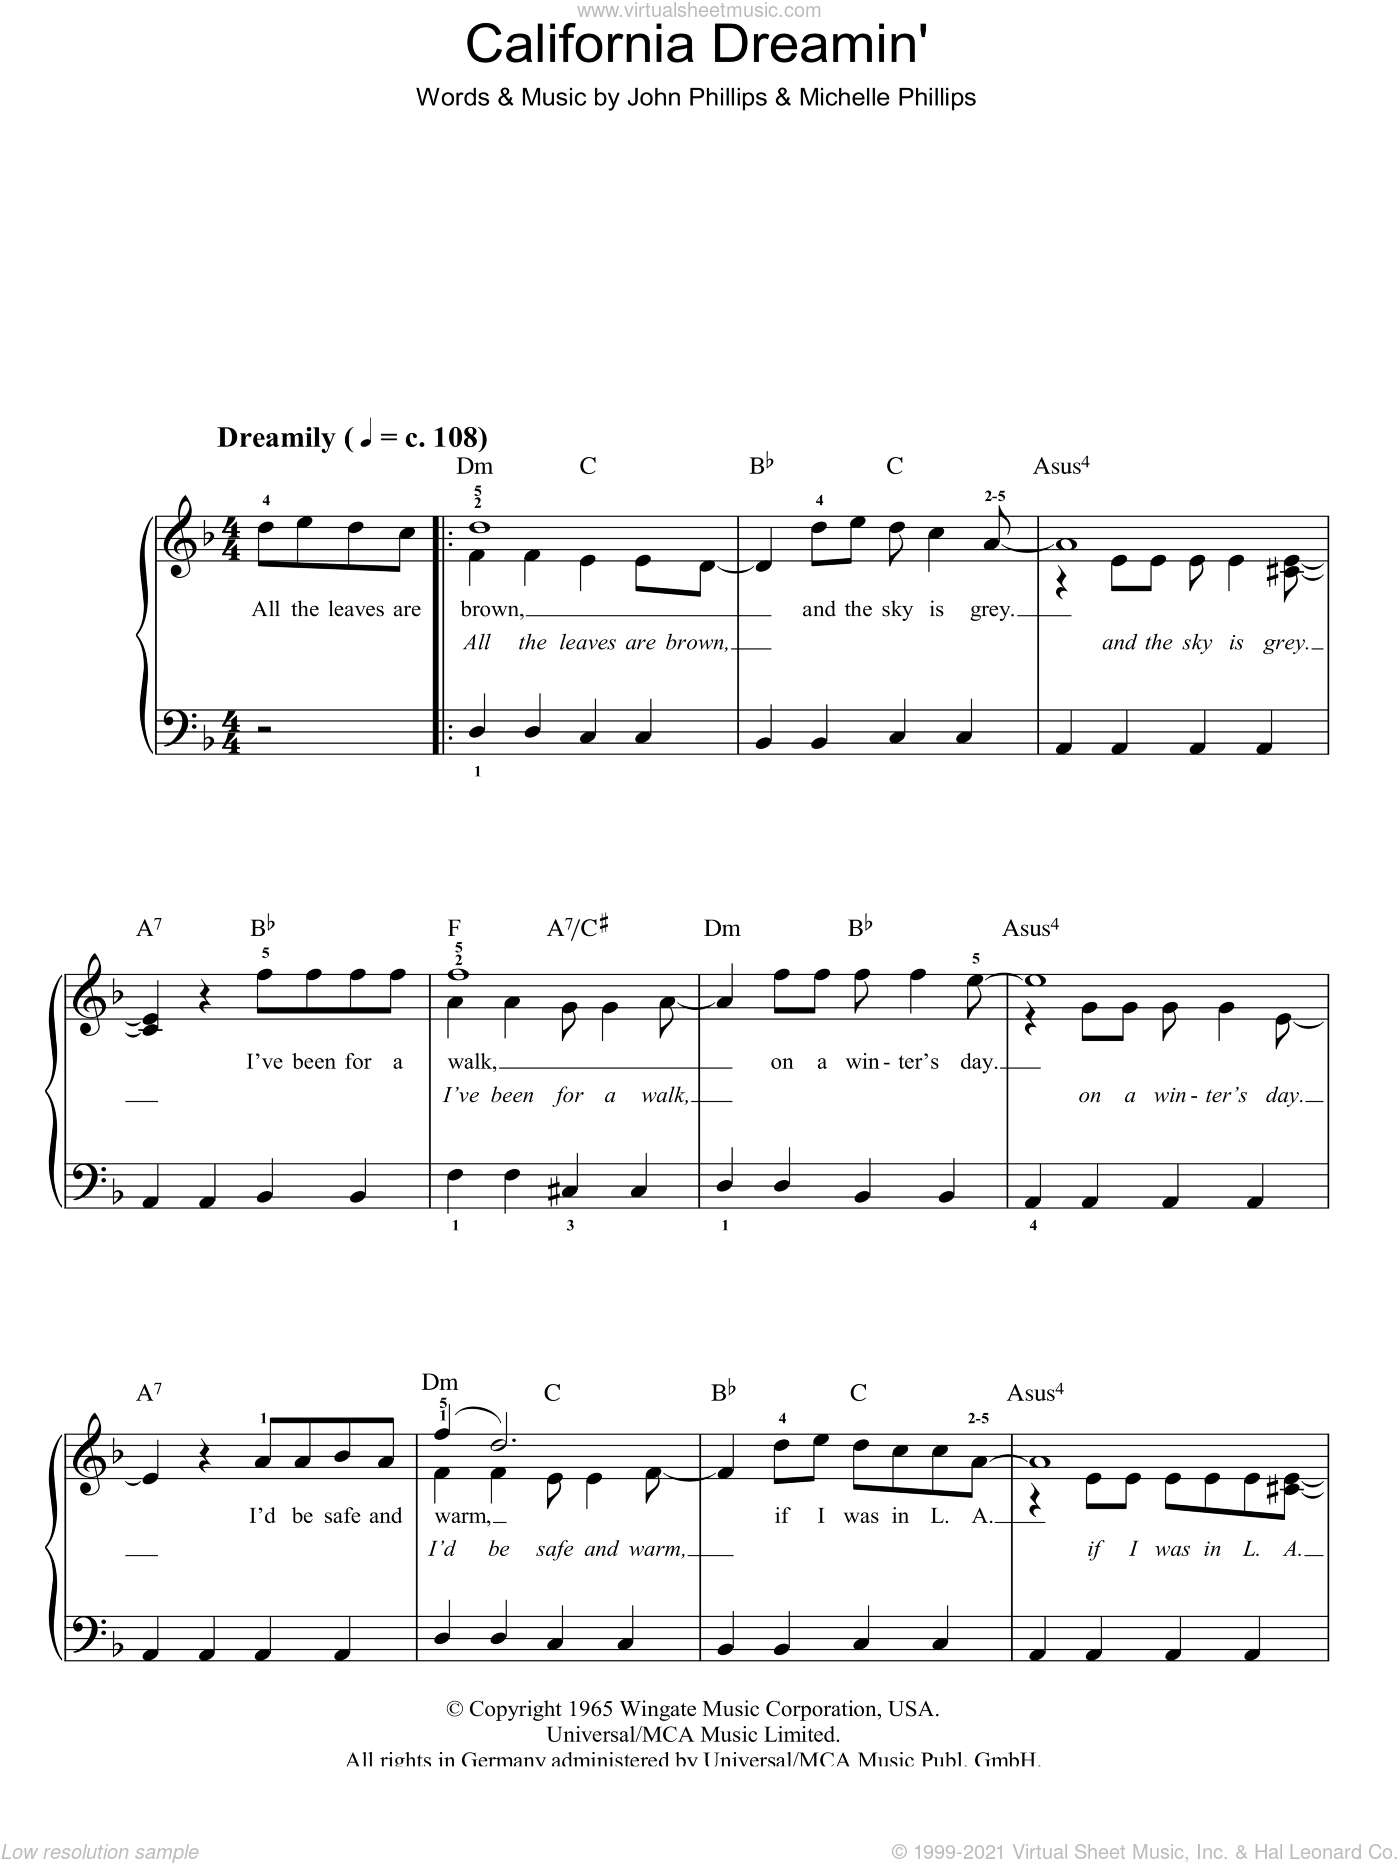 Papas California Dreamin Sheet Music Easy Version 2 For Piano Solo I know i've been here before but not going down in this storm so long, farewell to my darkest days listen to me now as i wash away my fears. papas california dreamin sheet music easy version 2 for piano solo